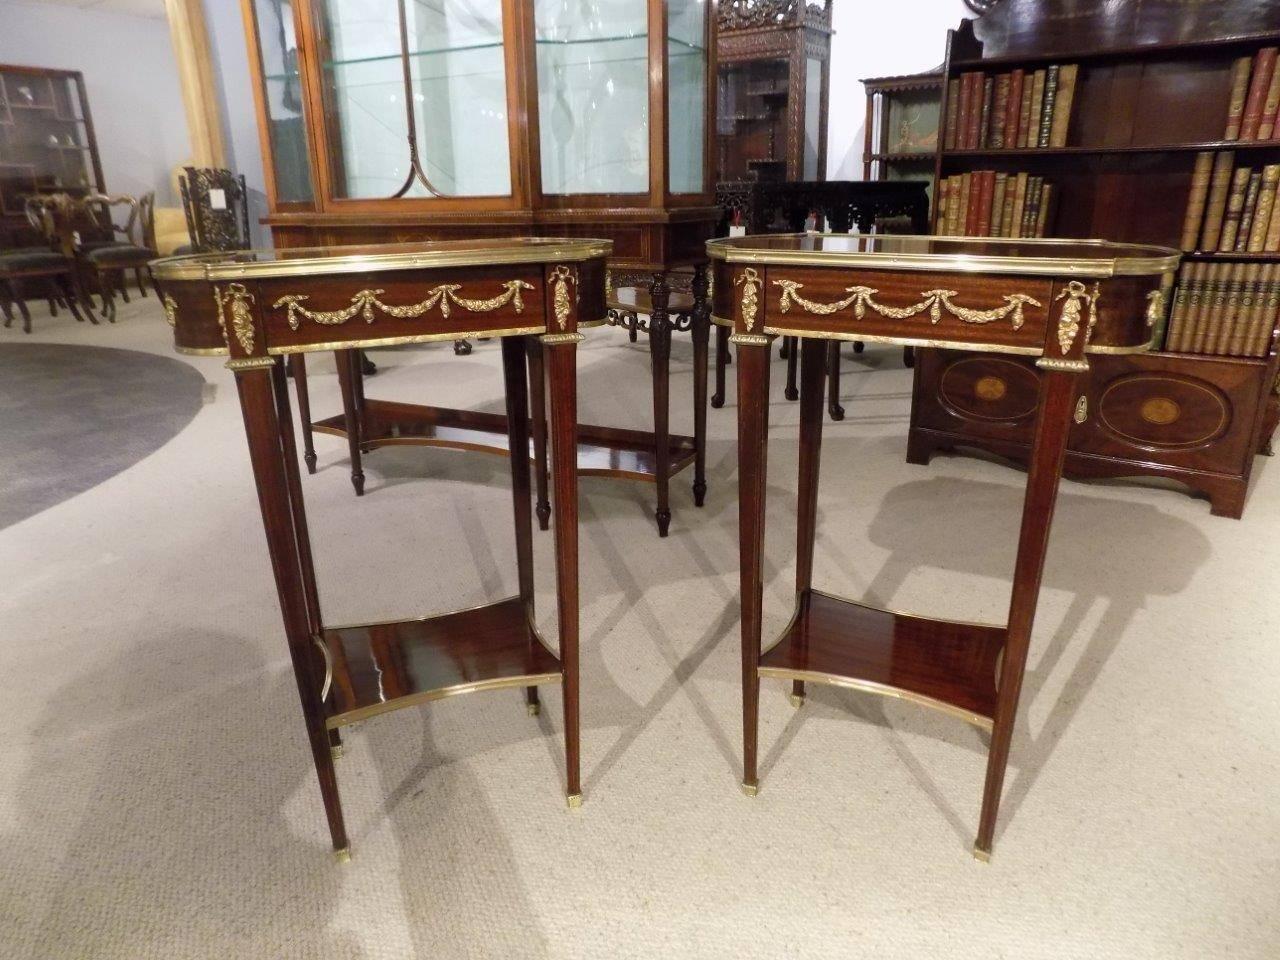 A fine quality pair of French mahogany, kingwood and parquetry inlaid late 19th century antique side tables. Each with a shaped top with a kingwood parquetry inlaid panel and mahogany and purple heart inlaid border with ormolu beading. Having a